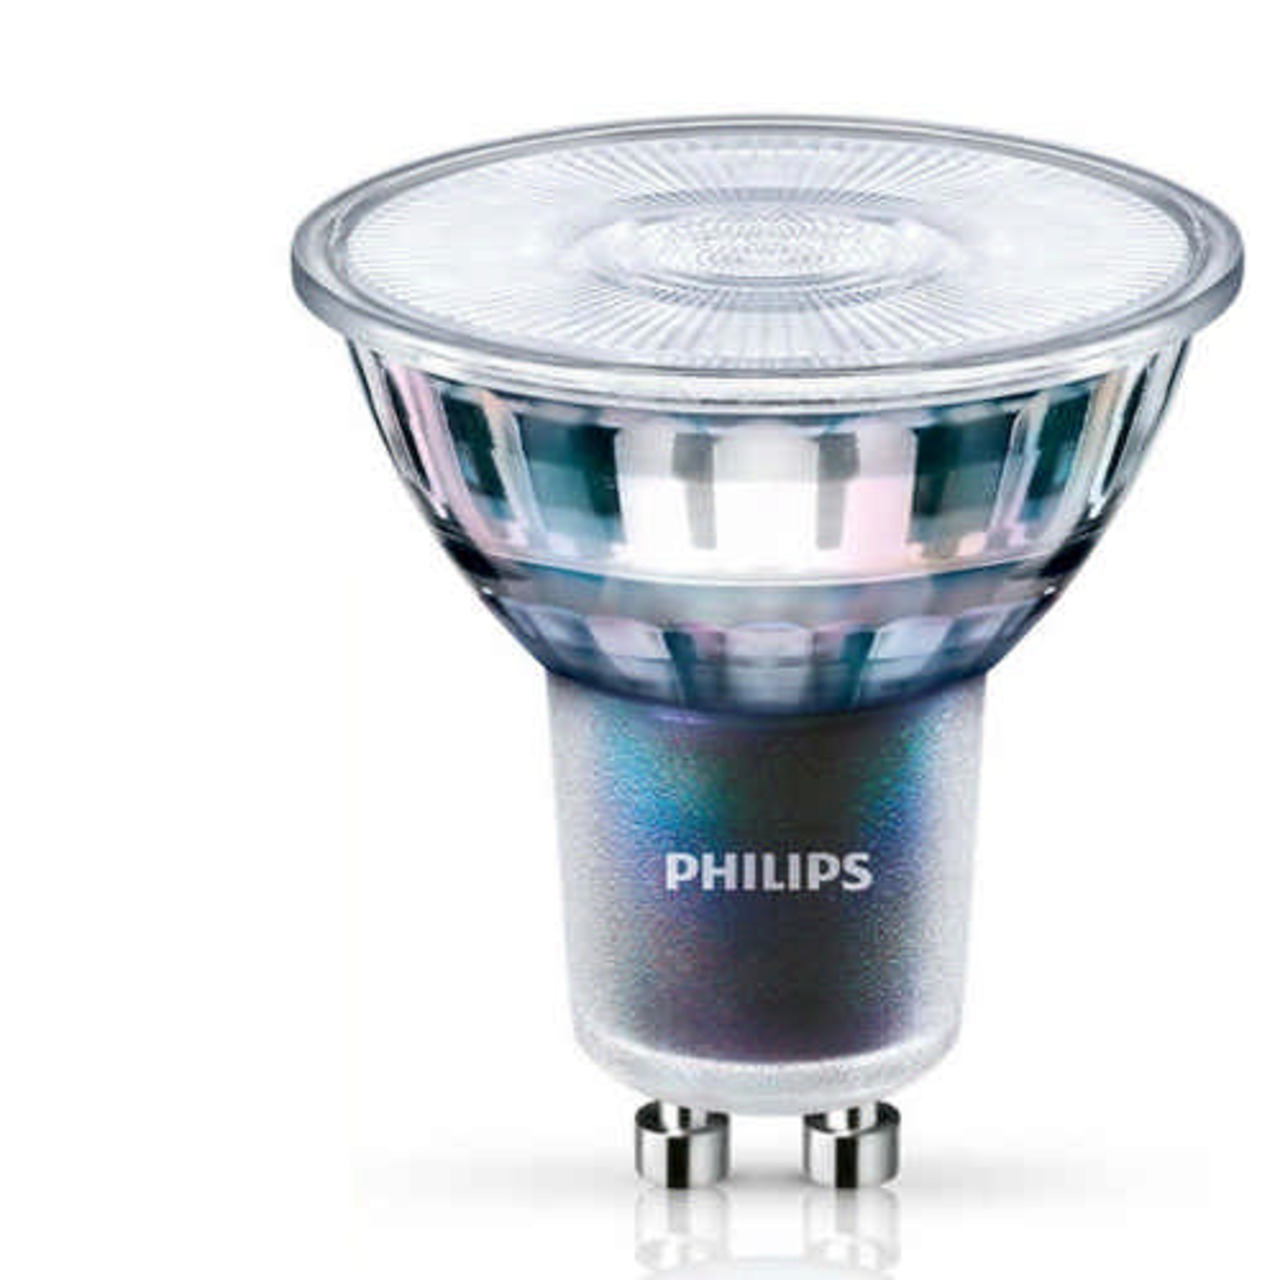 Philips MASTER LEDspot ExpertColor 5-5-W-GU10-LED-Lampe- 375 lm- 97 Ra- 25- warmweiss- dimmbar